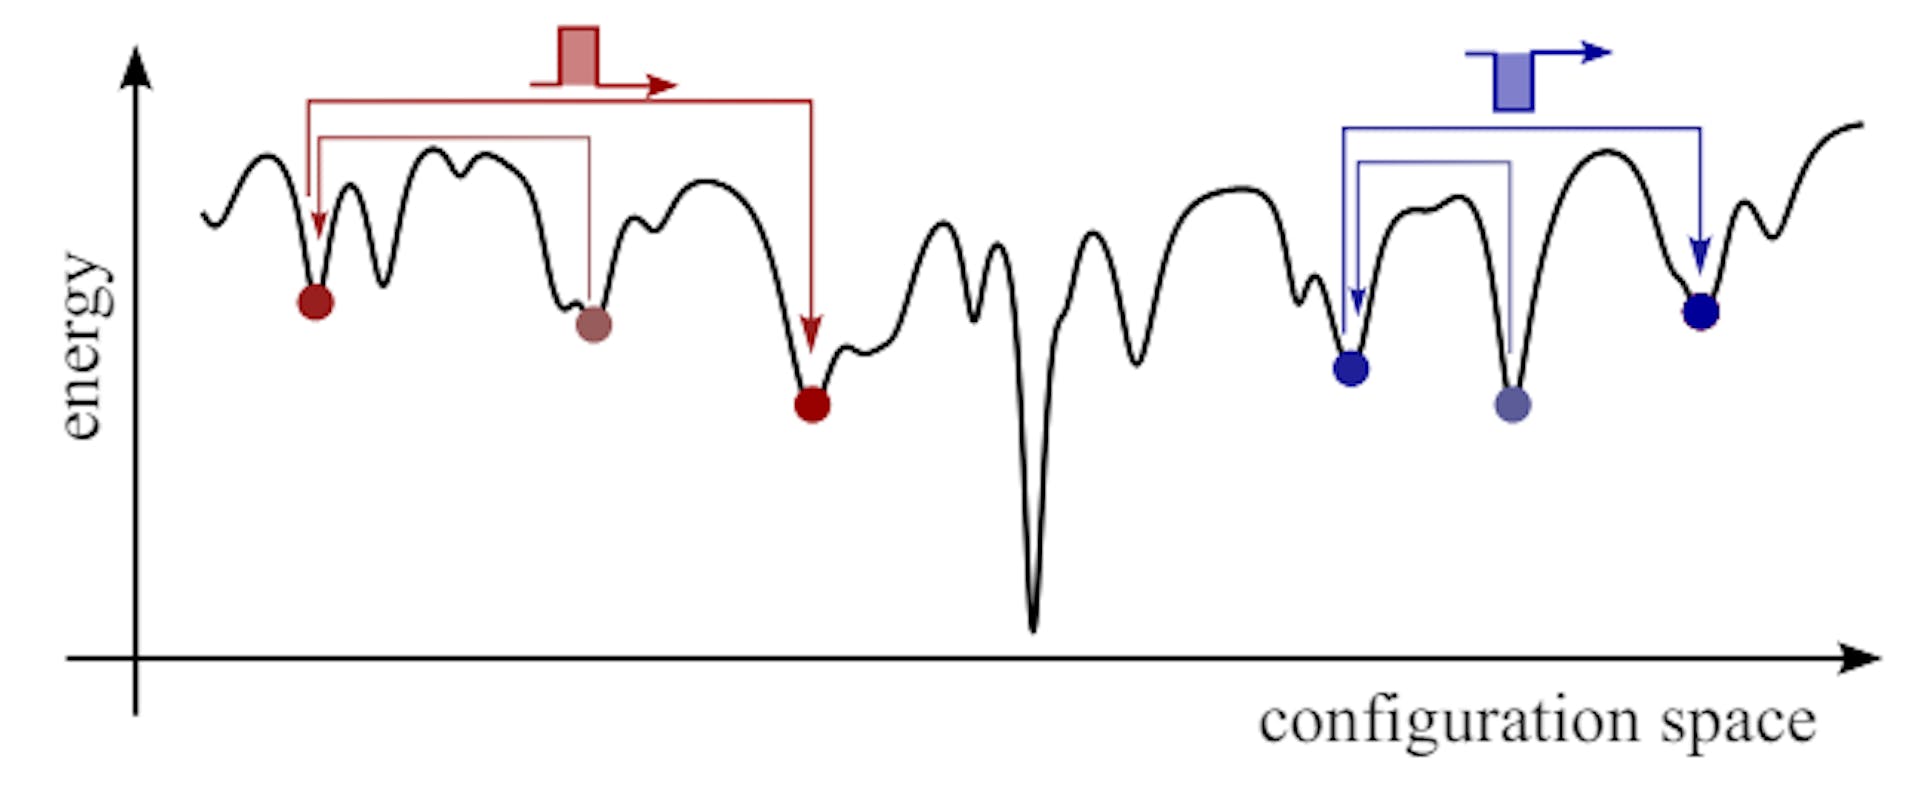 FIG. 5. Schematic illustration of the demagnetization process. The black solid curve represents the energy landscape of the system as a function of an abstract one-dimensional coordinate representing the spin configuration. The magnetic structure is represented at points within a complex potential landscape, exhibiting the transitions between different valleys through the demagnetization process, denoted by the red and blue arrows